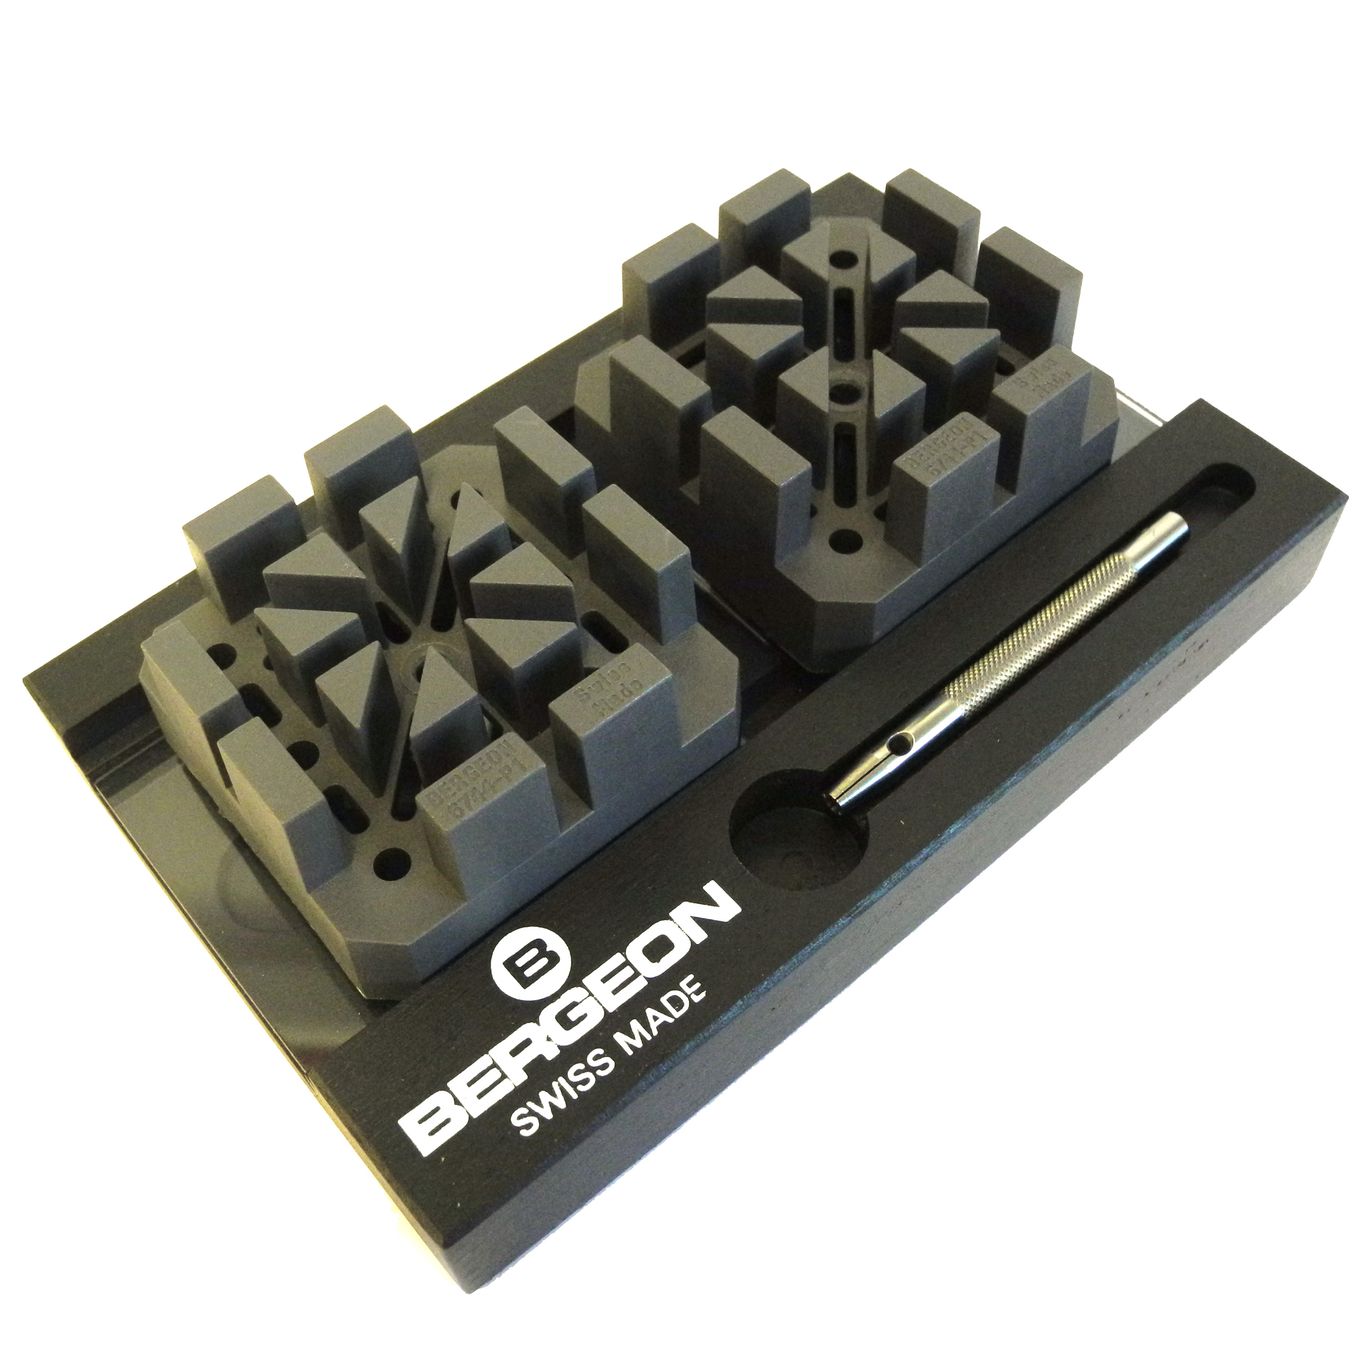 Bergeon 6744-P1-S Soft Band Support Block Watch Tool